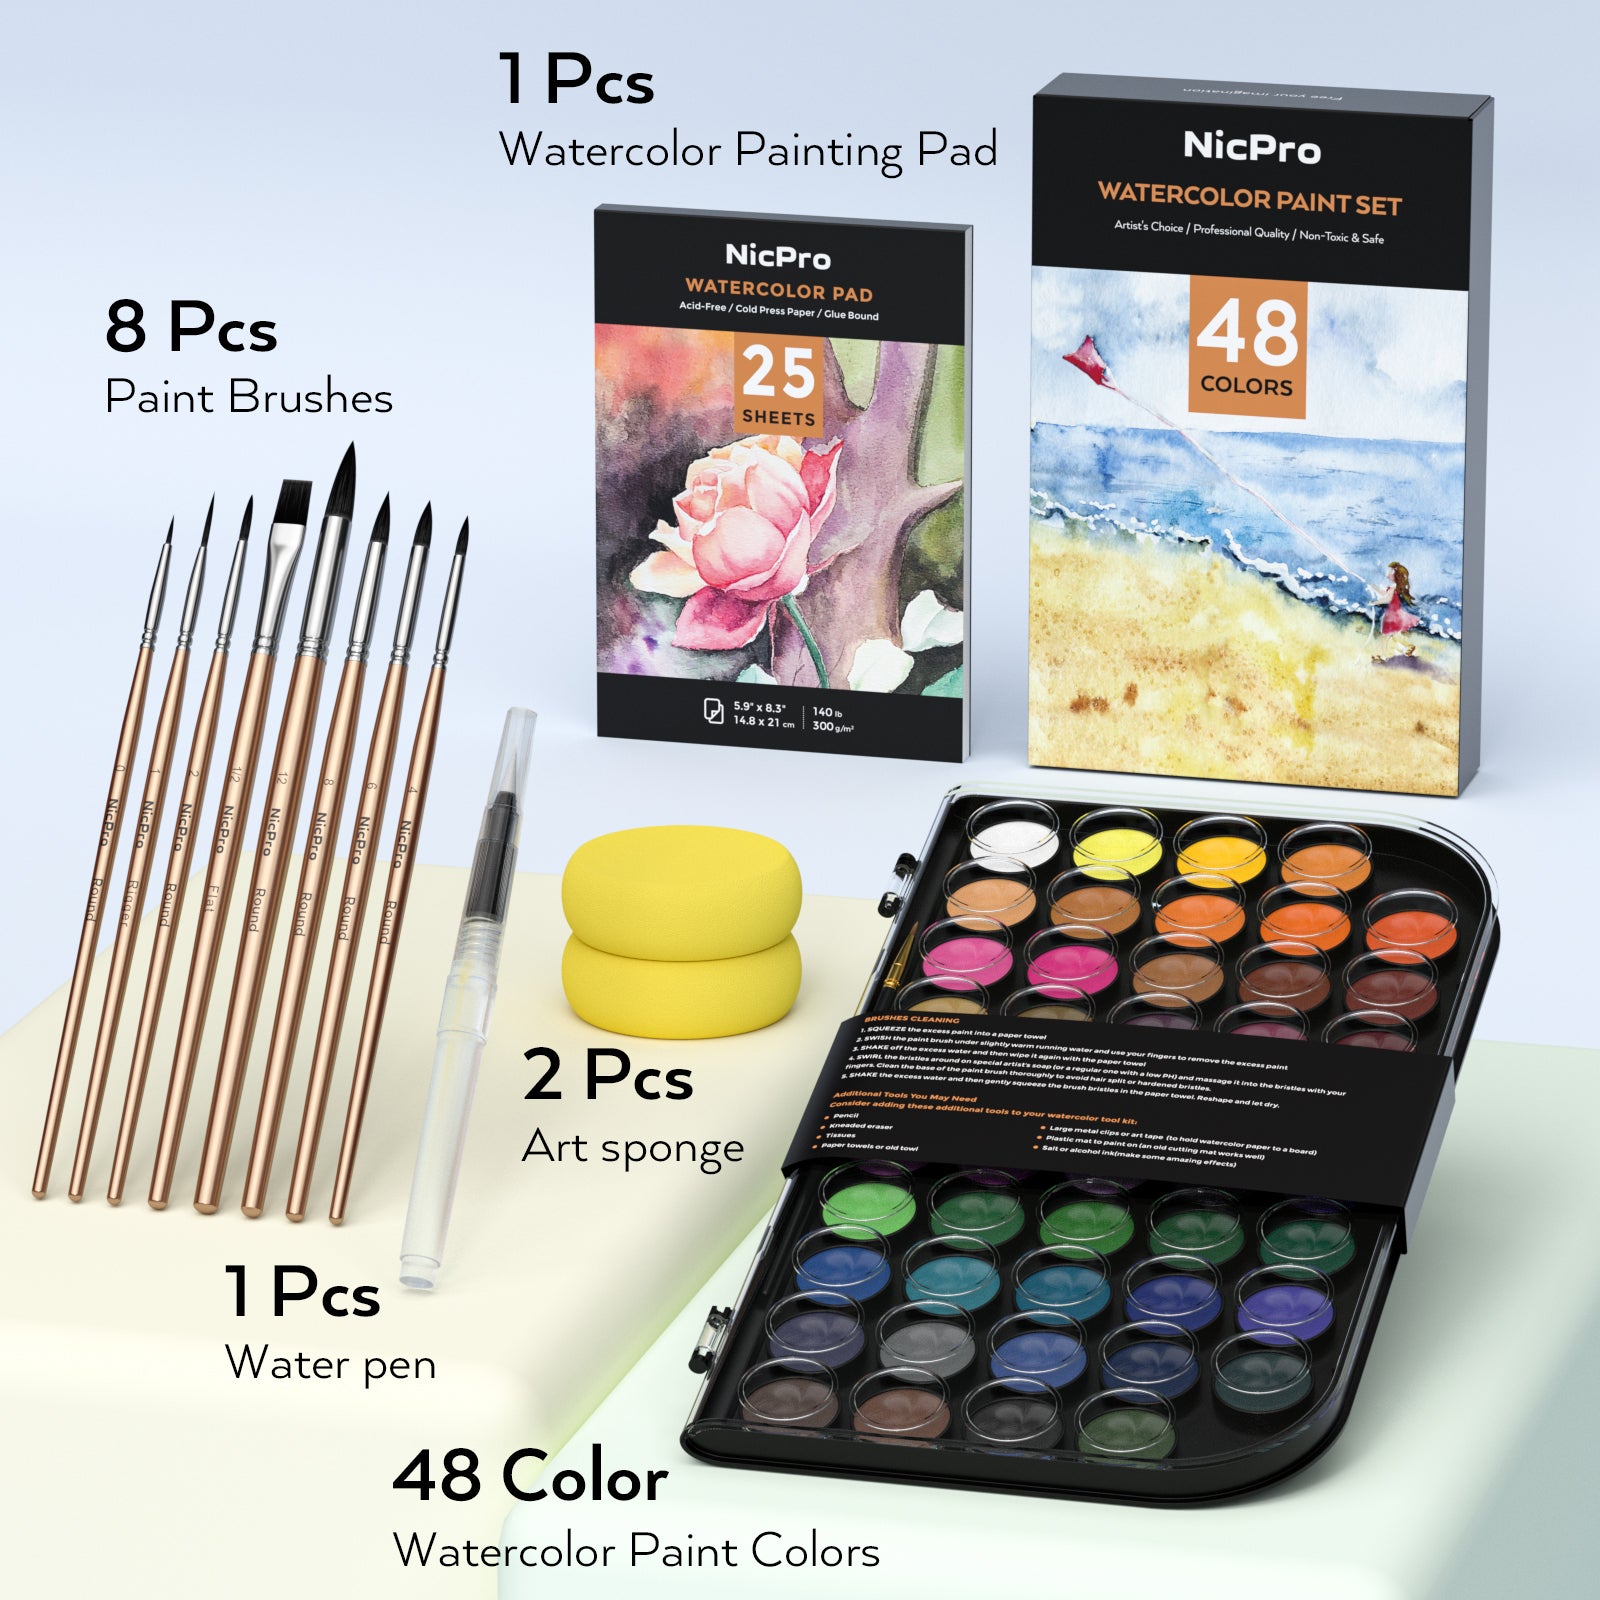 Nicpro Watercolor Paint Set, 48 Water Colors Kit with 8 Squirrel Brushes, Palette, Watercolor Pen, 25 Art Pad Paper, 2 Art Sponges, Non-Toxic Painting Supplies for Kids, Adults, Beginners, Artists